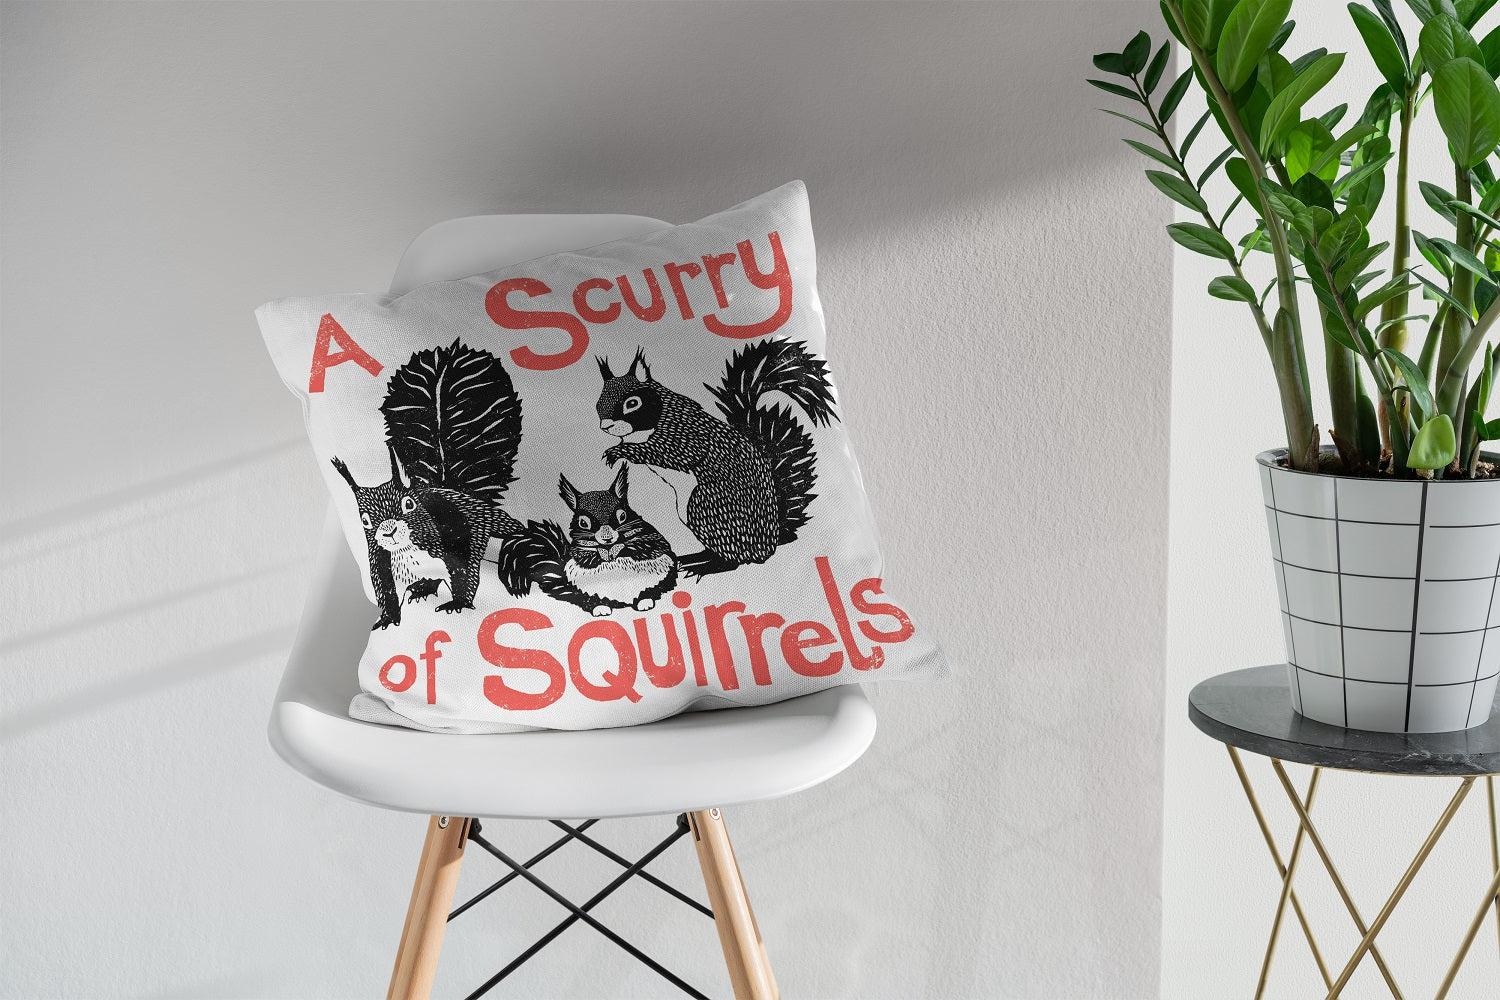 Scurry of Squirrels - Collective Noun Cushion